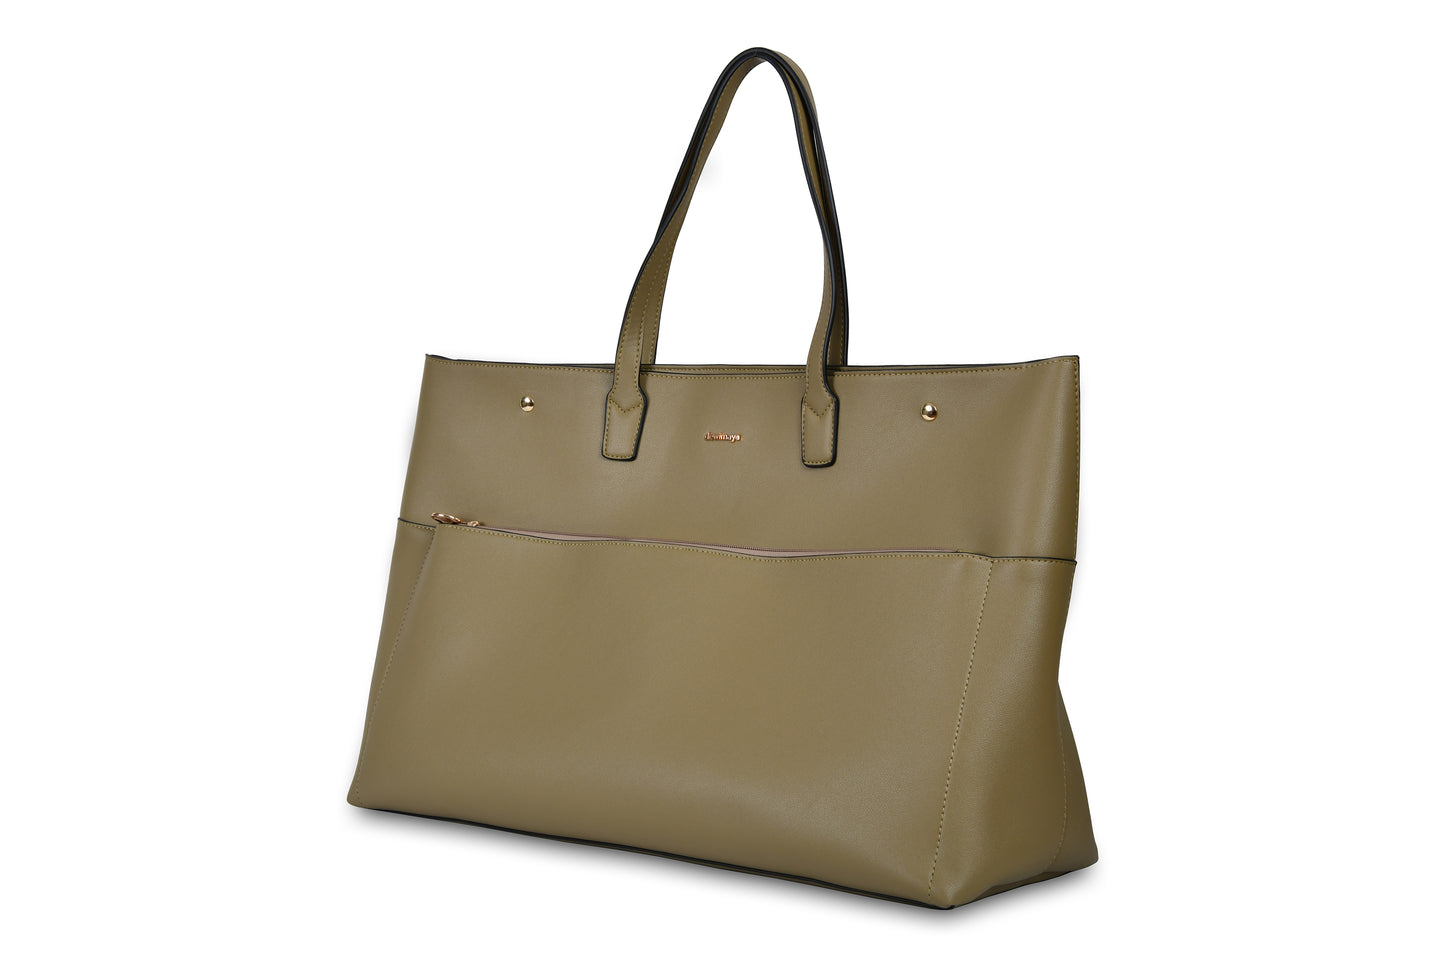 Zuma Pebble Grain Faux Leather Olive Green Big Tote Bag Beach Bag made bye Dewi Maya side view available at the best boutique in Upstate South Carolina Spartanburg Greenville Dewi Maya Boutique